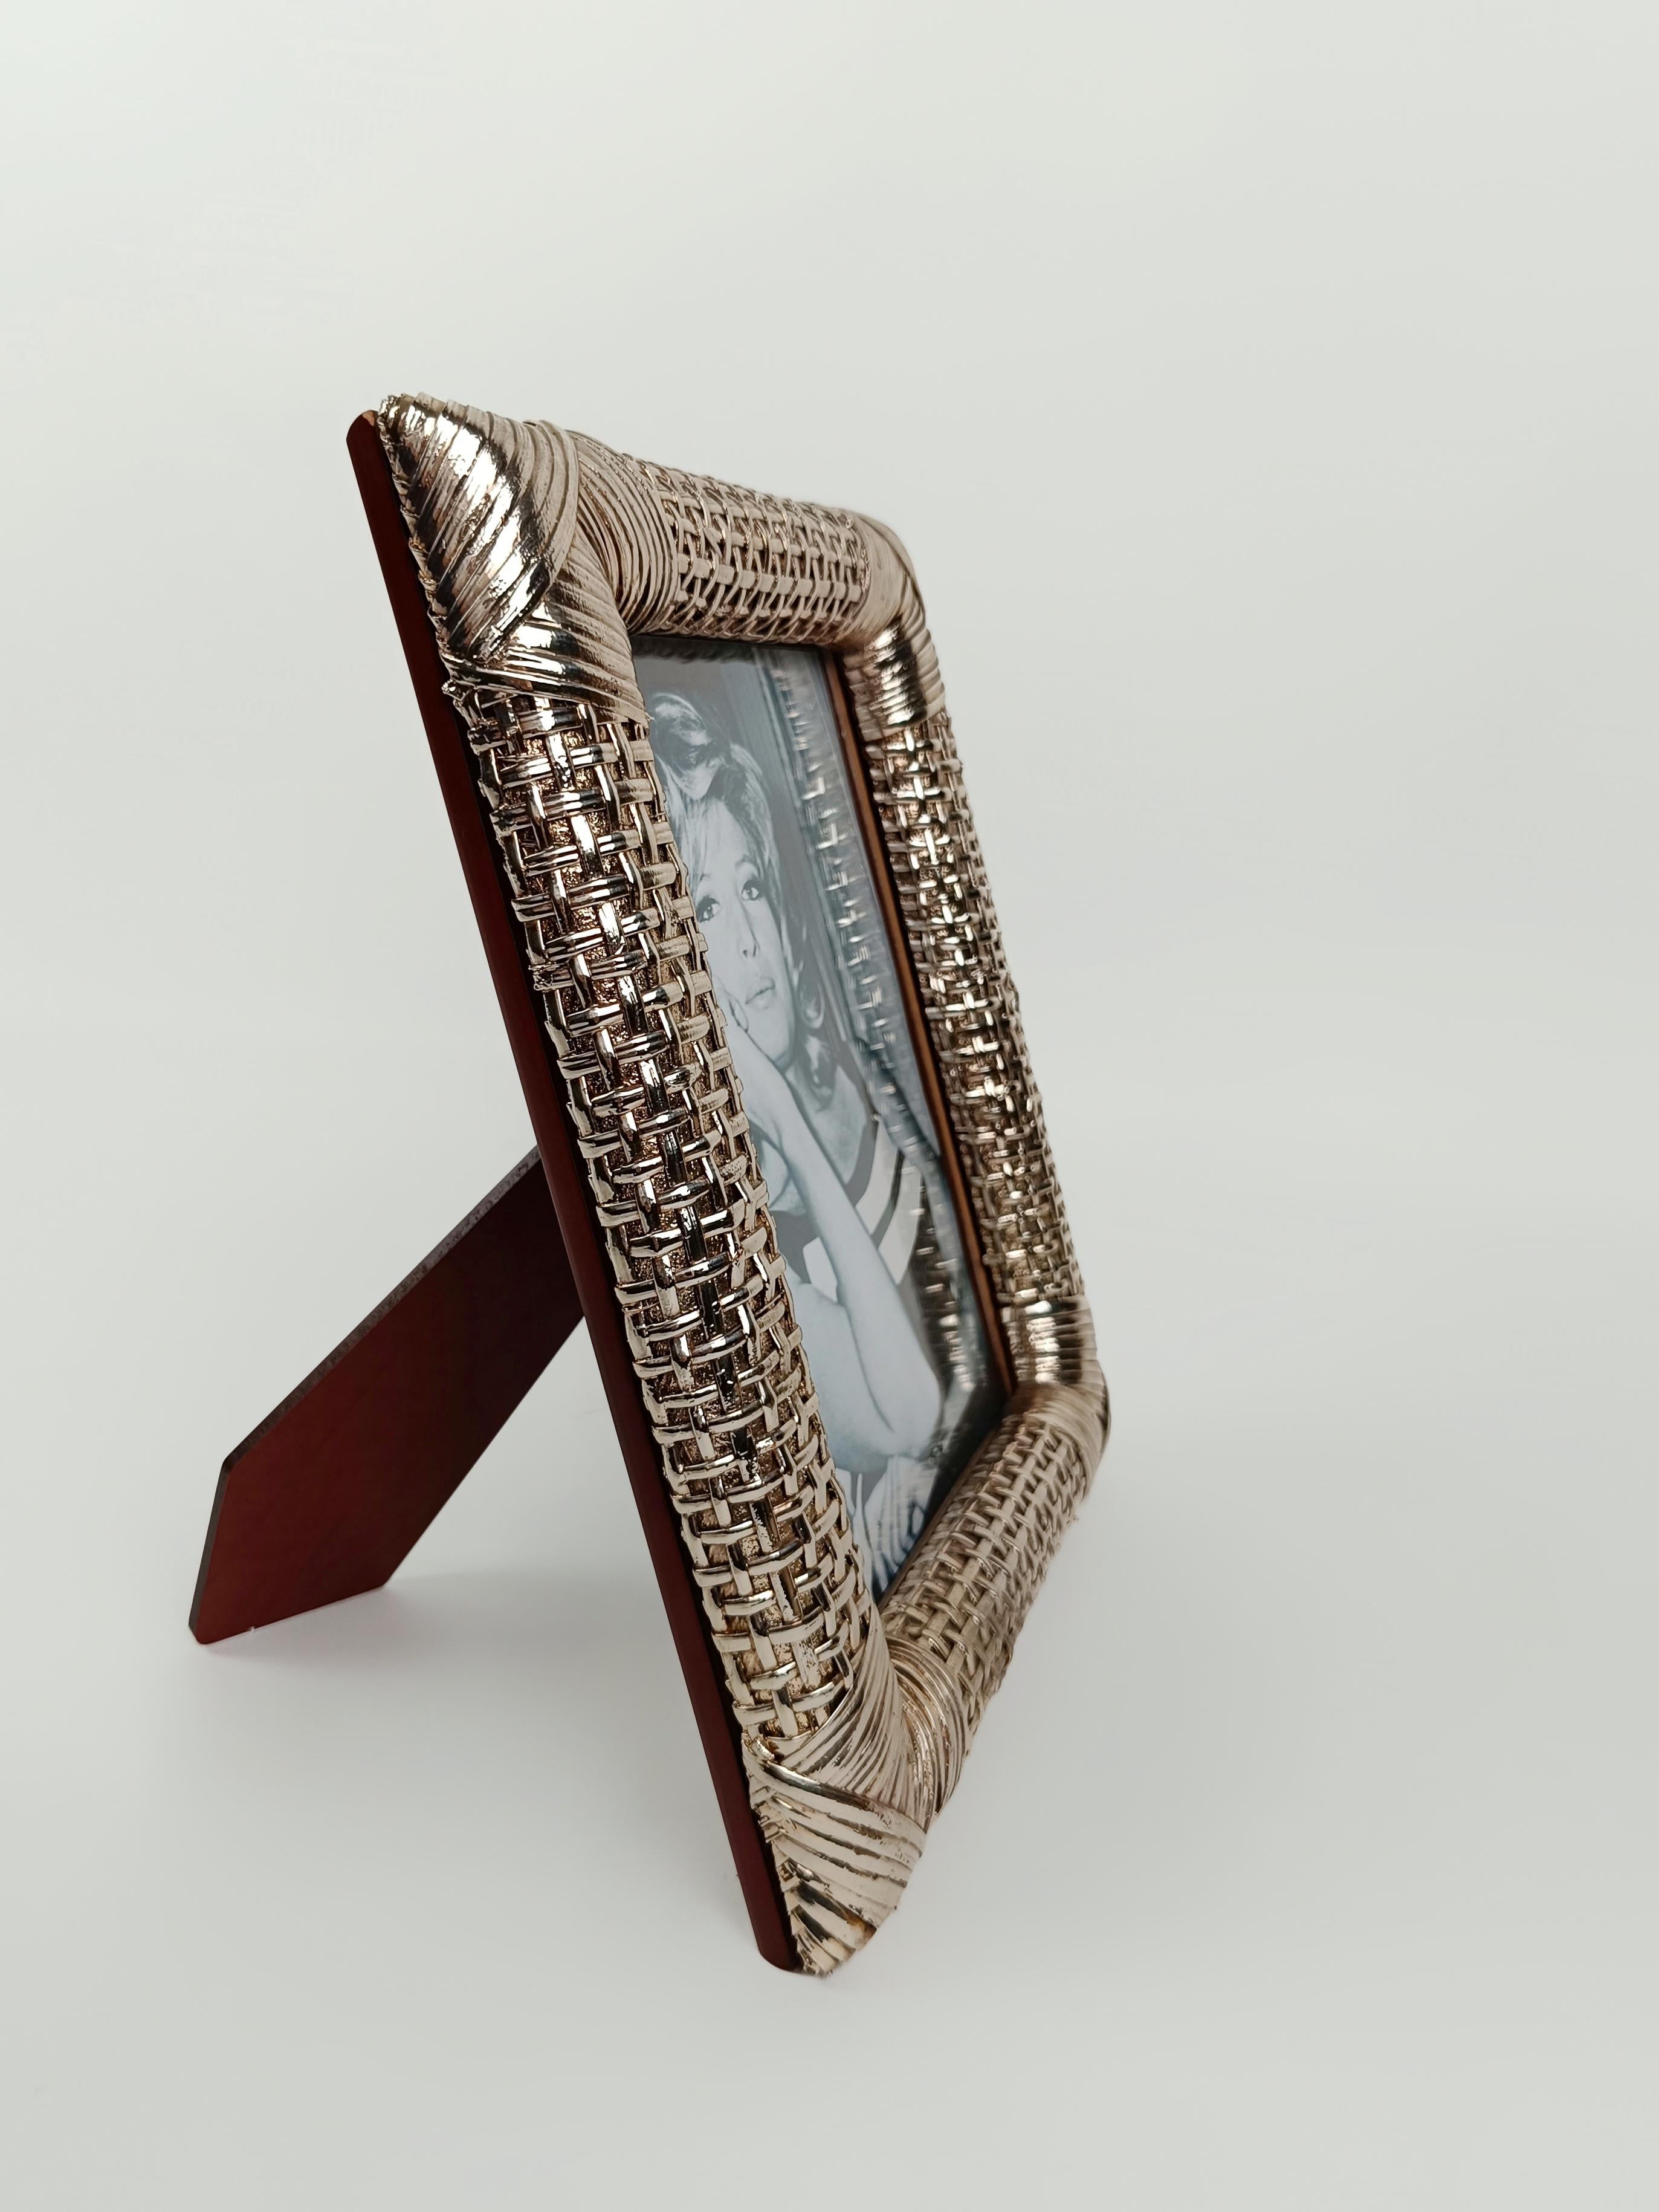 Midcentury Table Picture Frame Made in Silver Plated Woven Wicker, Italy 1970s For Sale 7